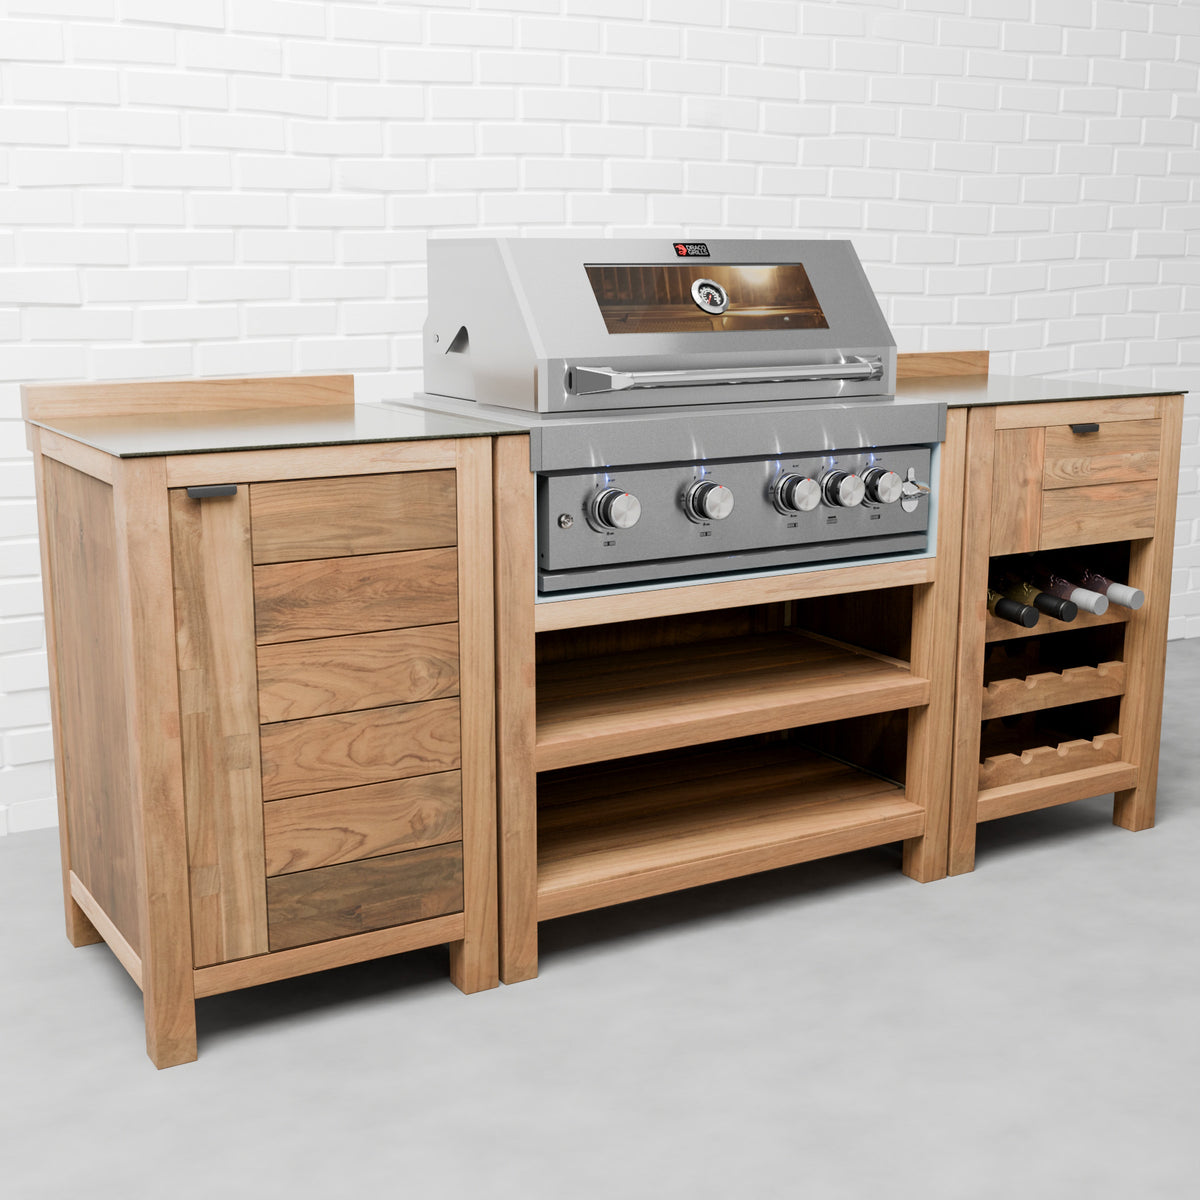 Draco Grills Teak 4 Burner Outdoor Kitchen with Modular Single Cupboard and Wine Cabinet